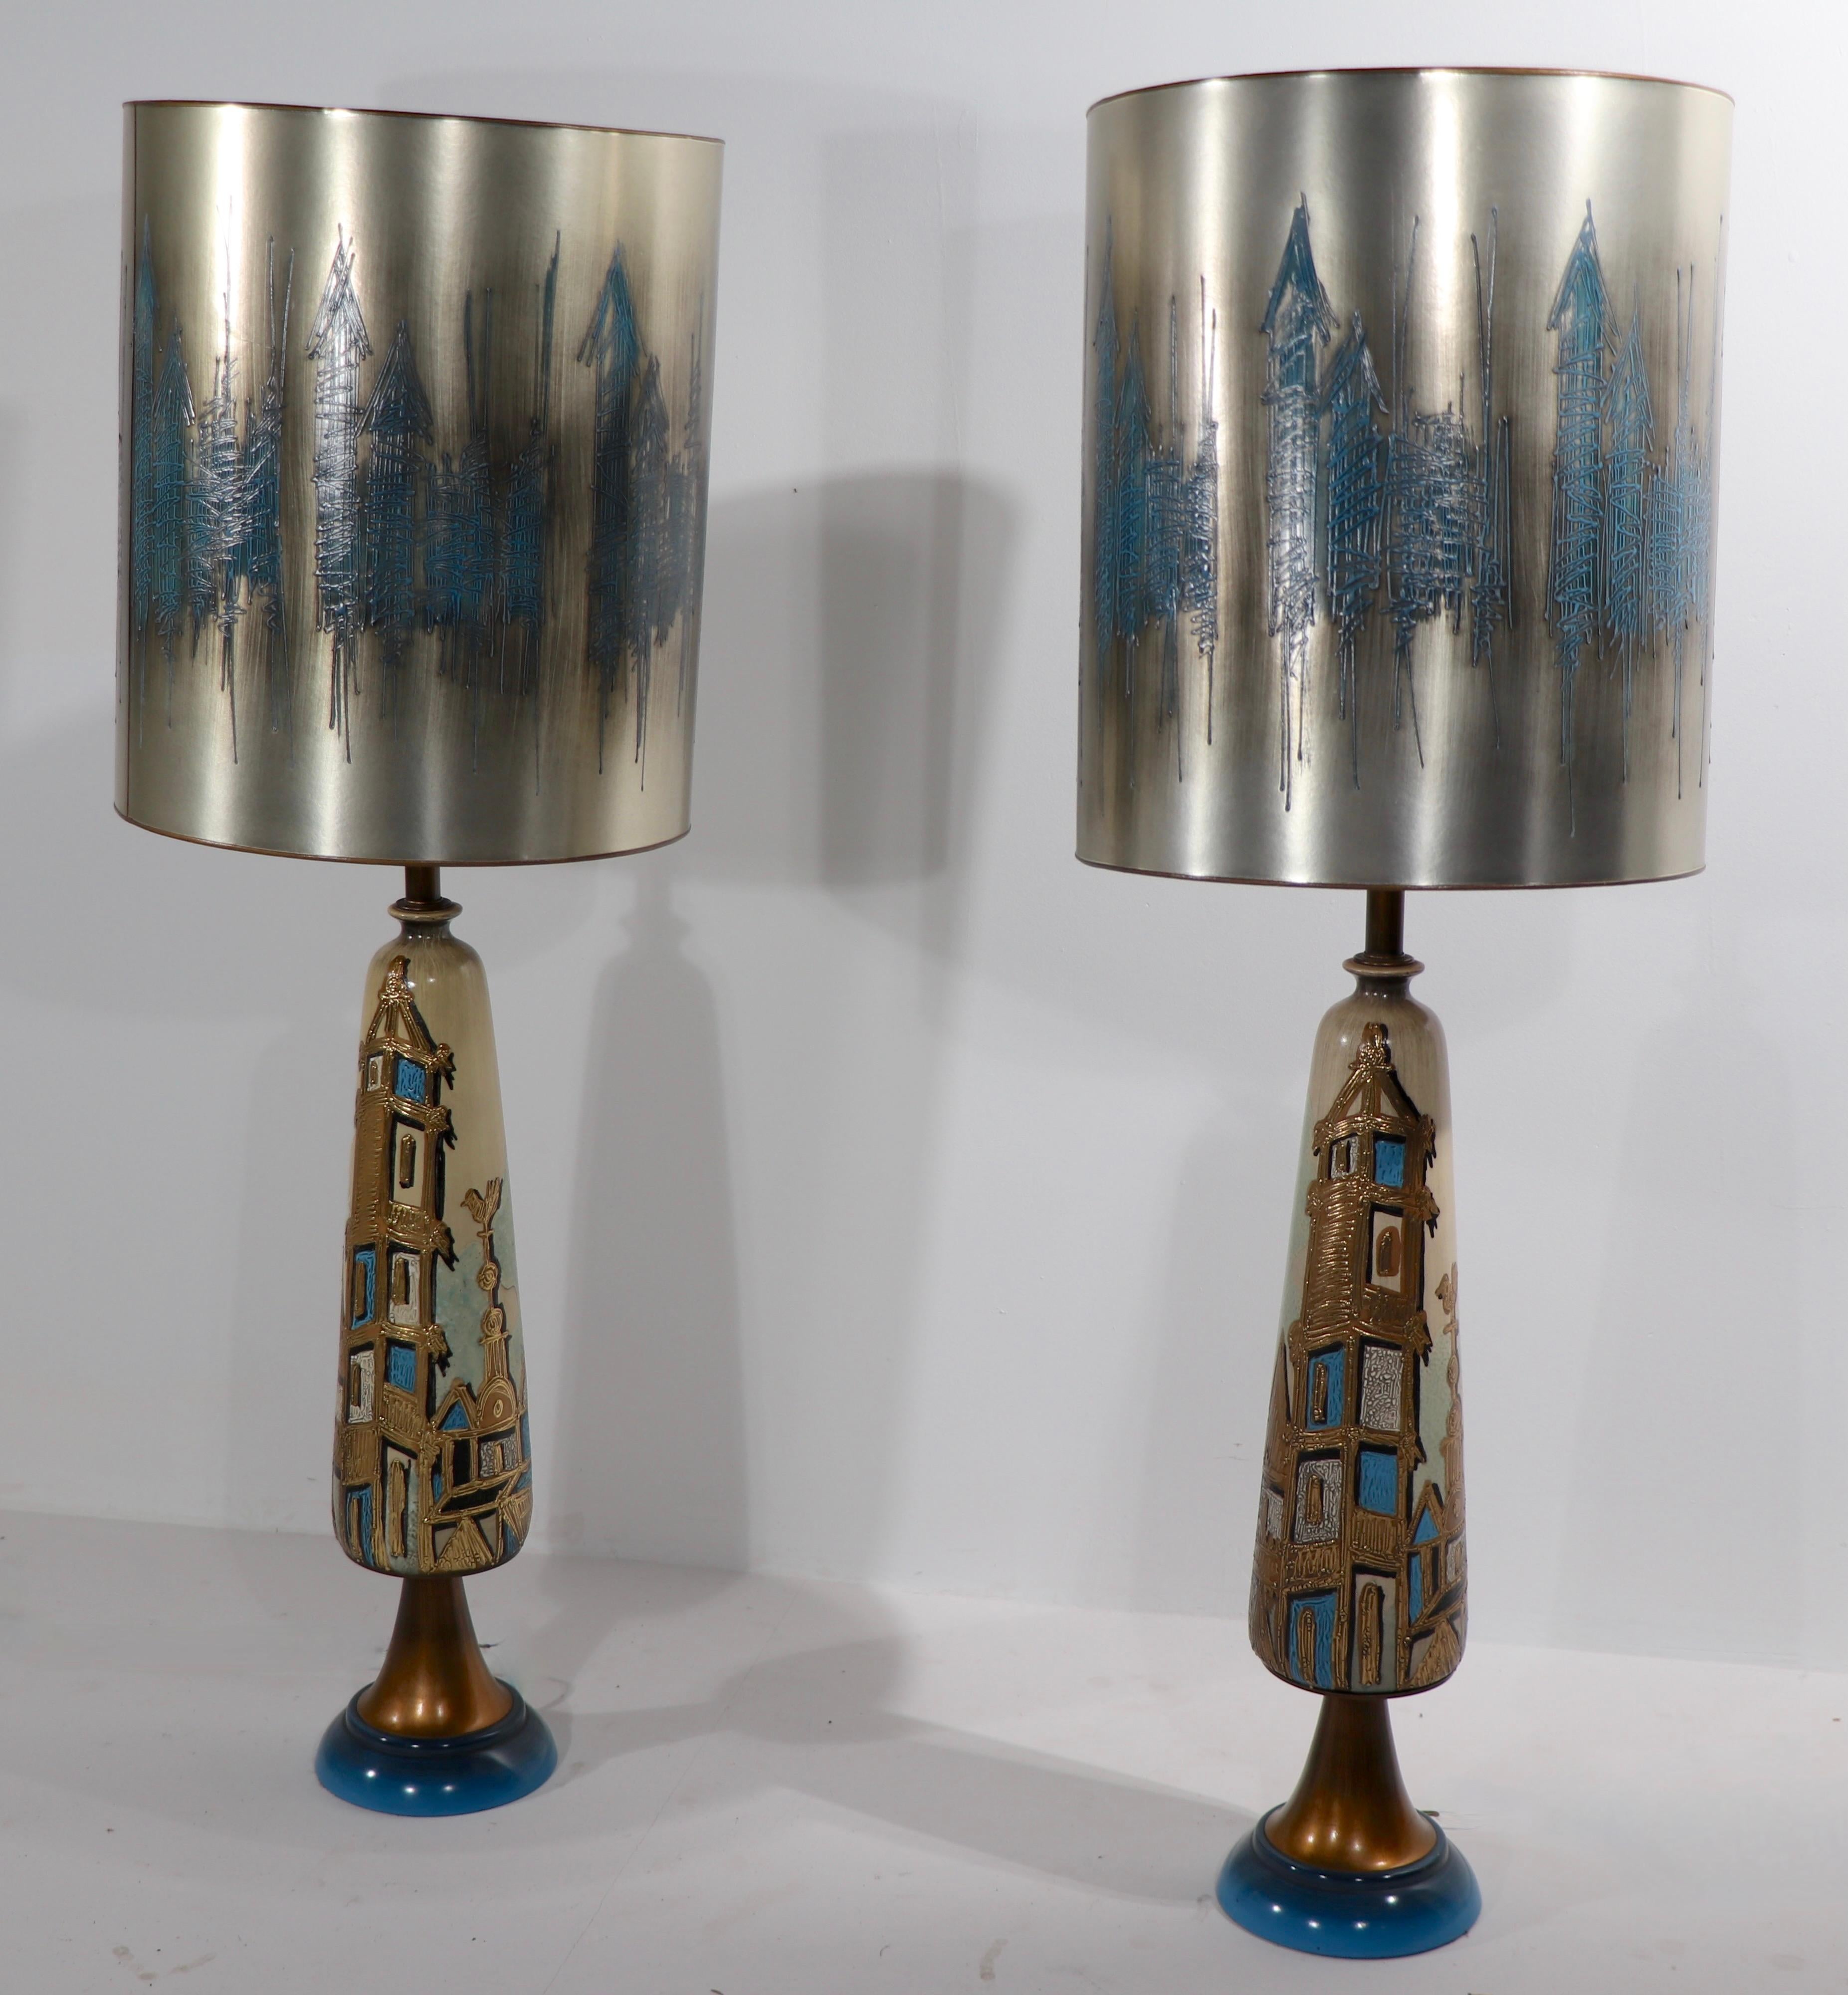 Incredible pair of Brutalist, mid century, Hollywood Regency, table lamps, with original silver and blue decorated shades. The lamps depict a stylized city scene with columns, towers and buildings. The ceramic bodies have an off white and tan tone